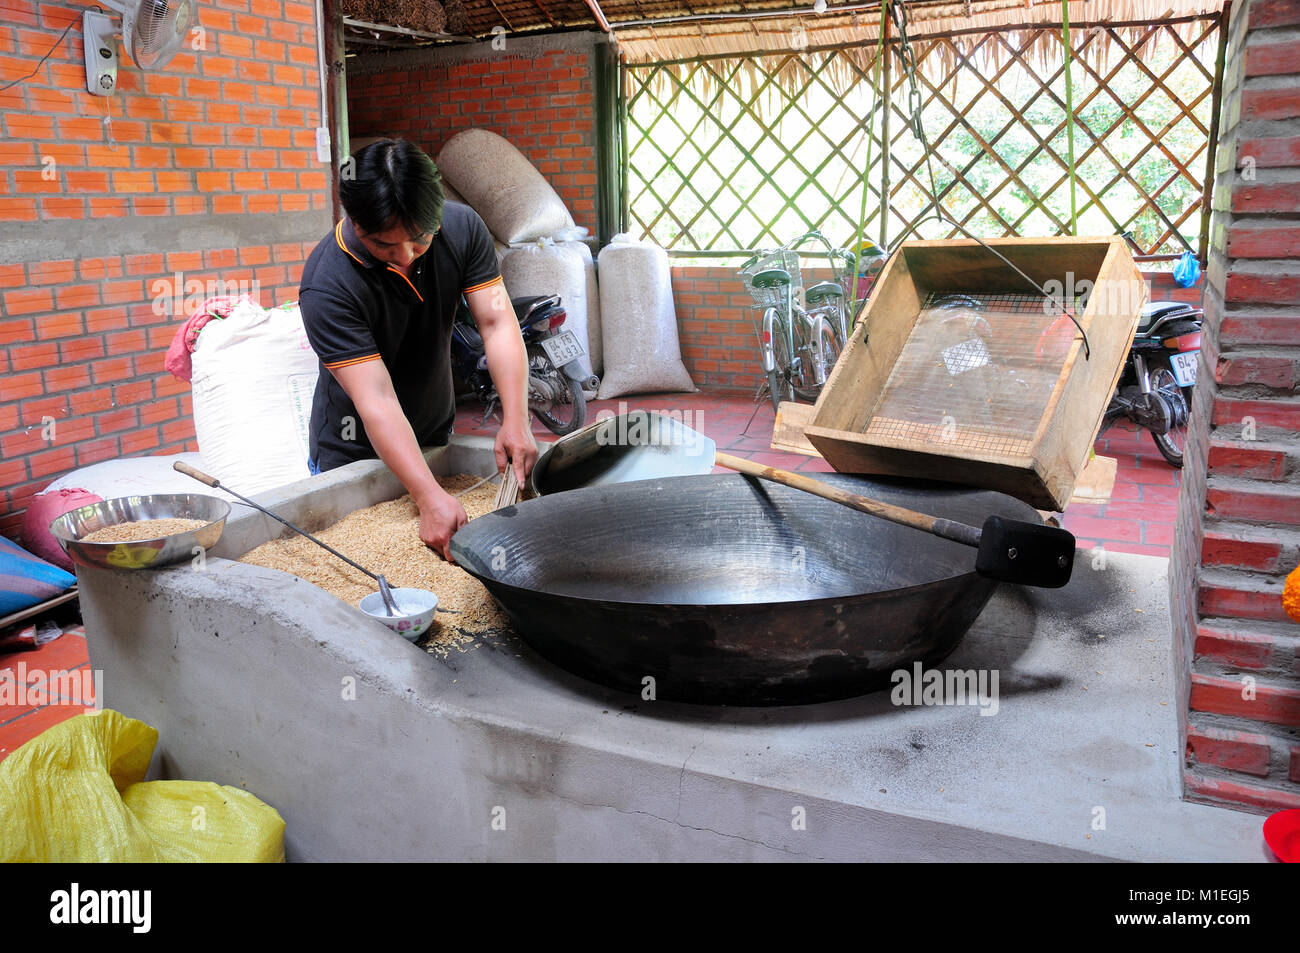 February 18, 2015.  Vinh Long, Vietnam.  A Vietnamese man in Vinh Long, South Vietnam lighting a fire under a large metal wok to make toasted rice can Stock Photo